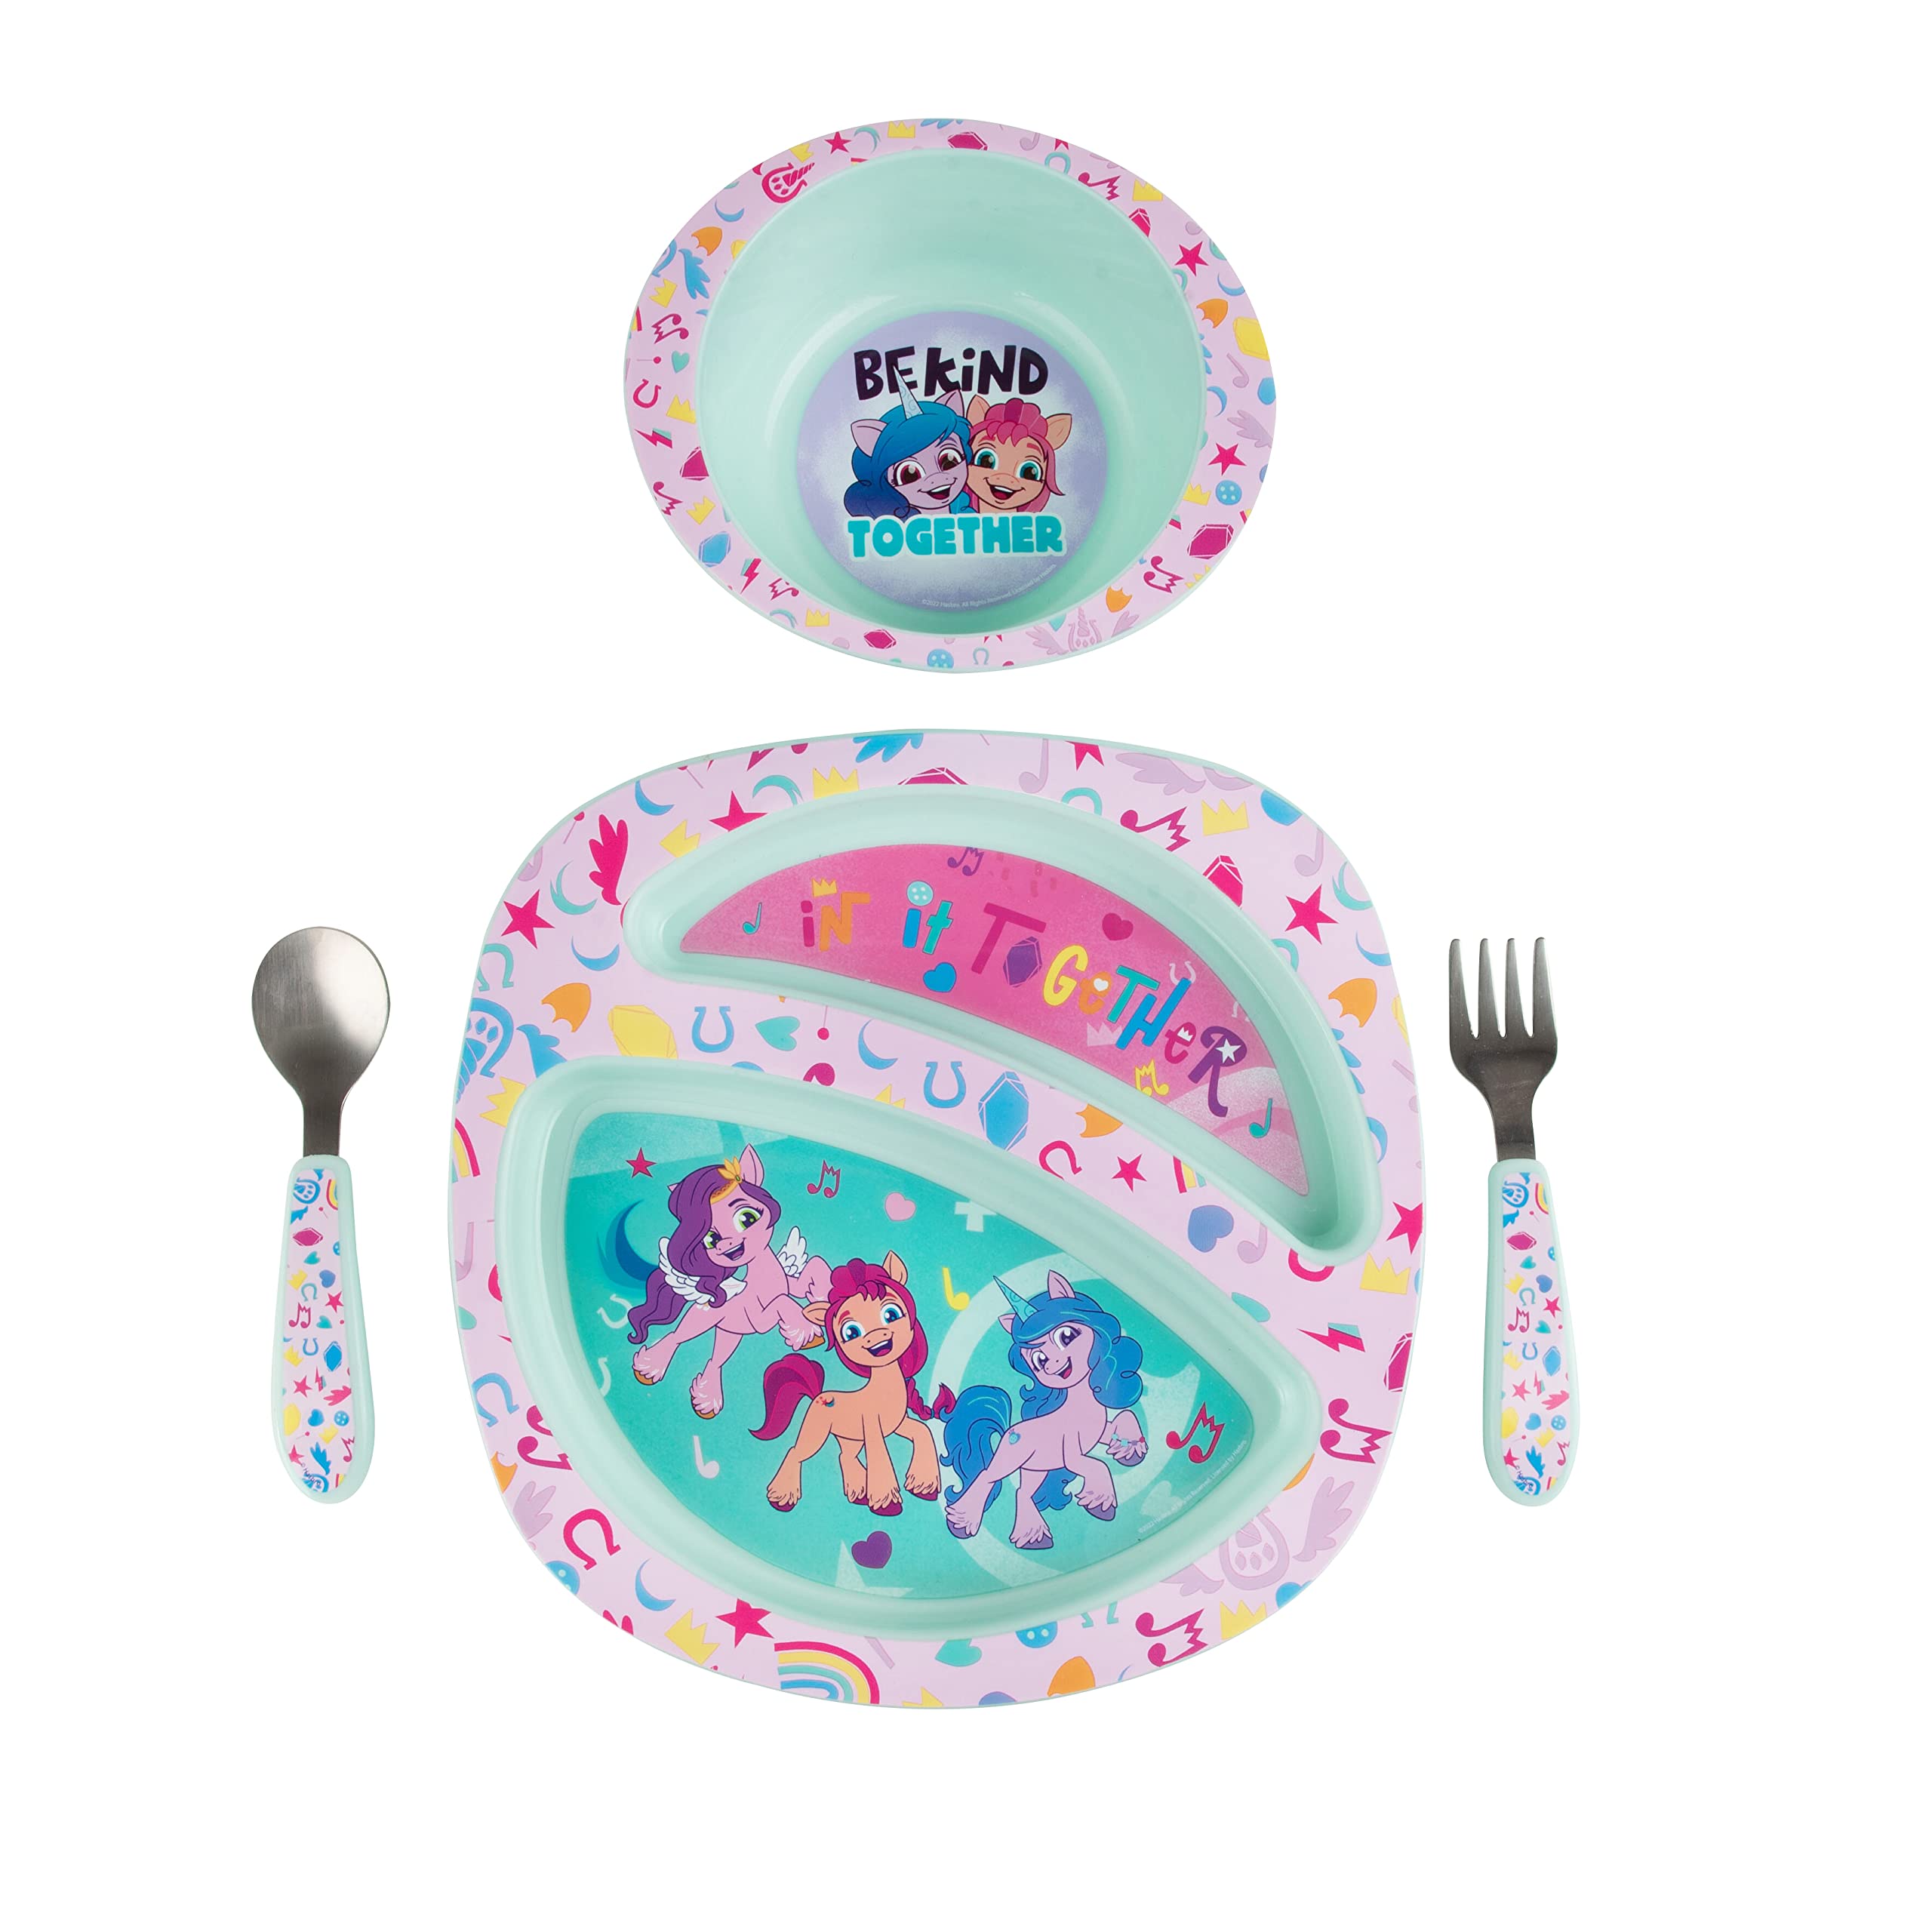 The First Years My Little Pony Mealtime Toddler Feeding Set - Includes Dishwasher Safe Toddler Plate, Bowl, Fork, and Toddler Sp